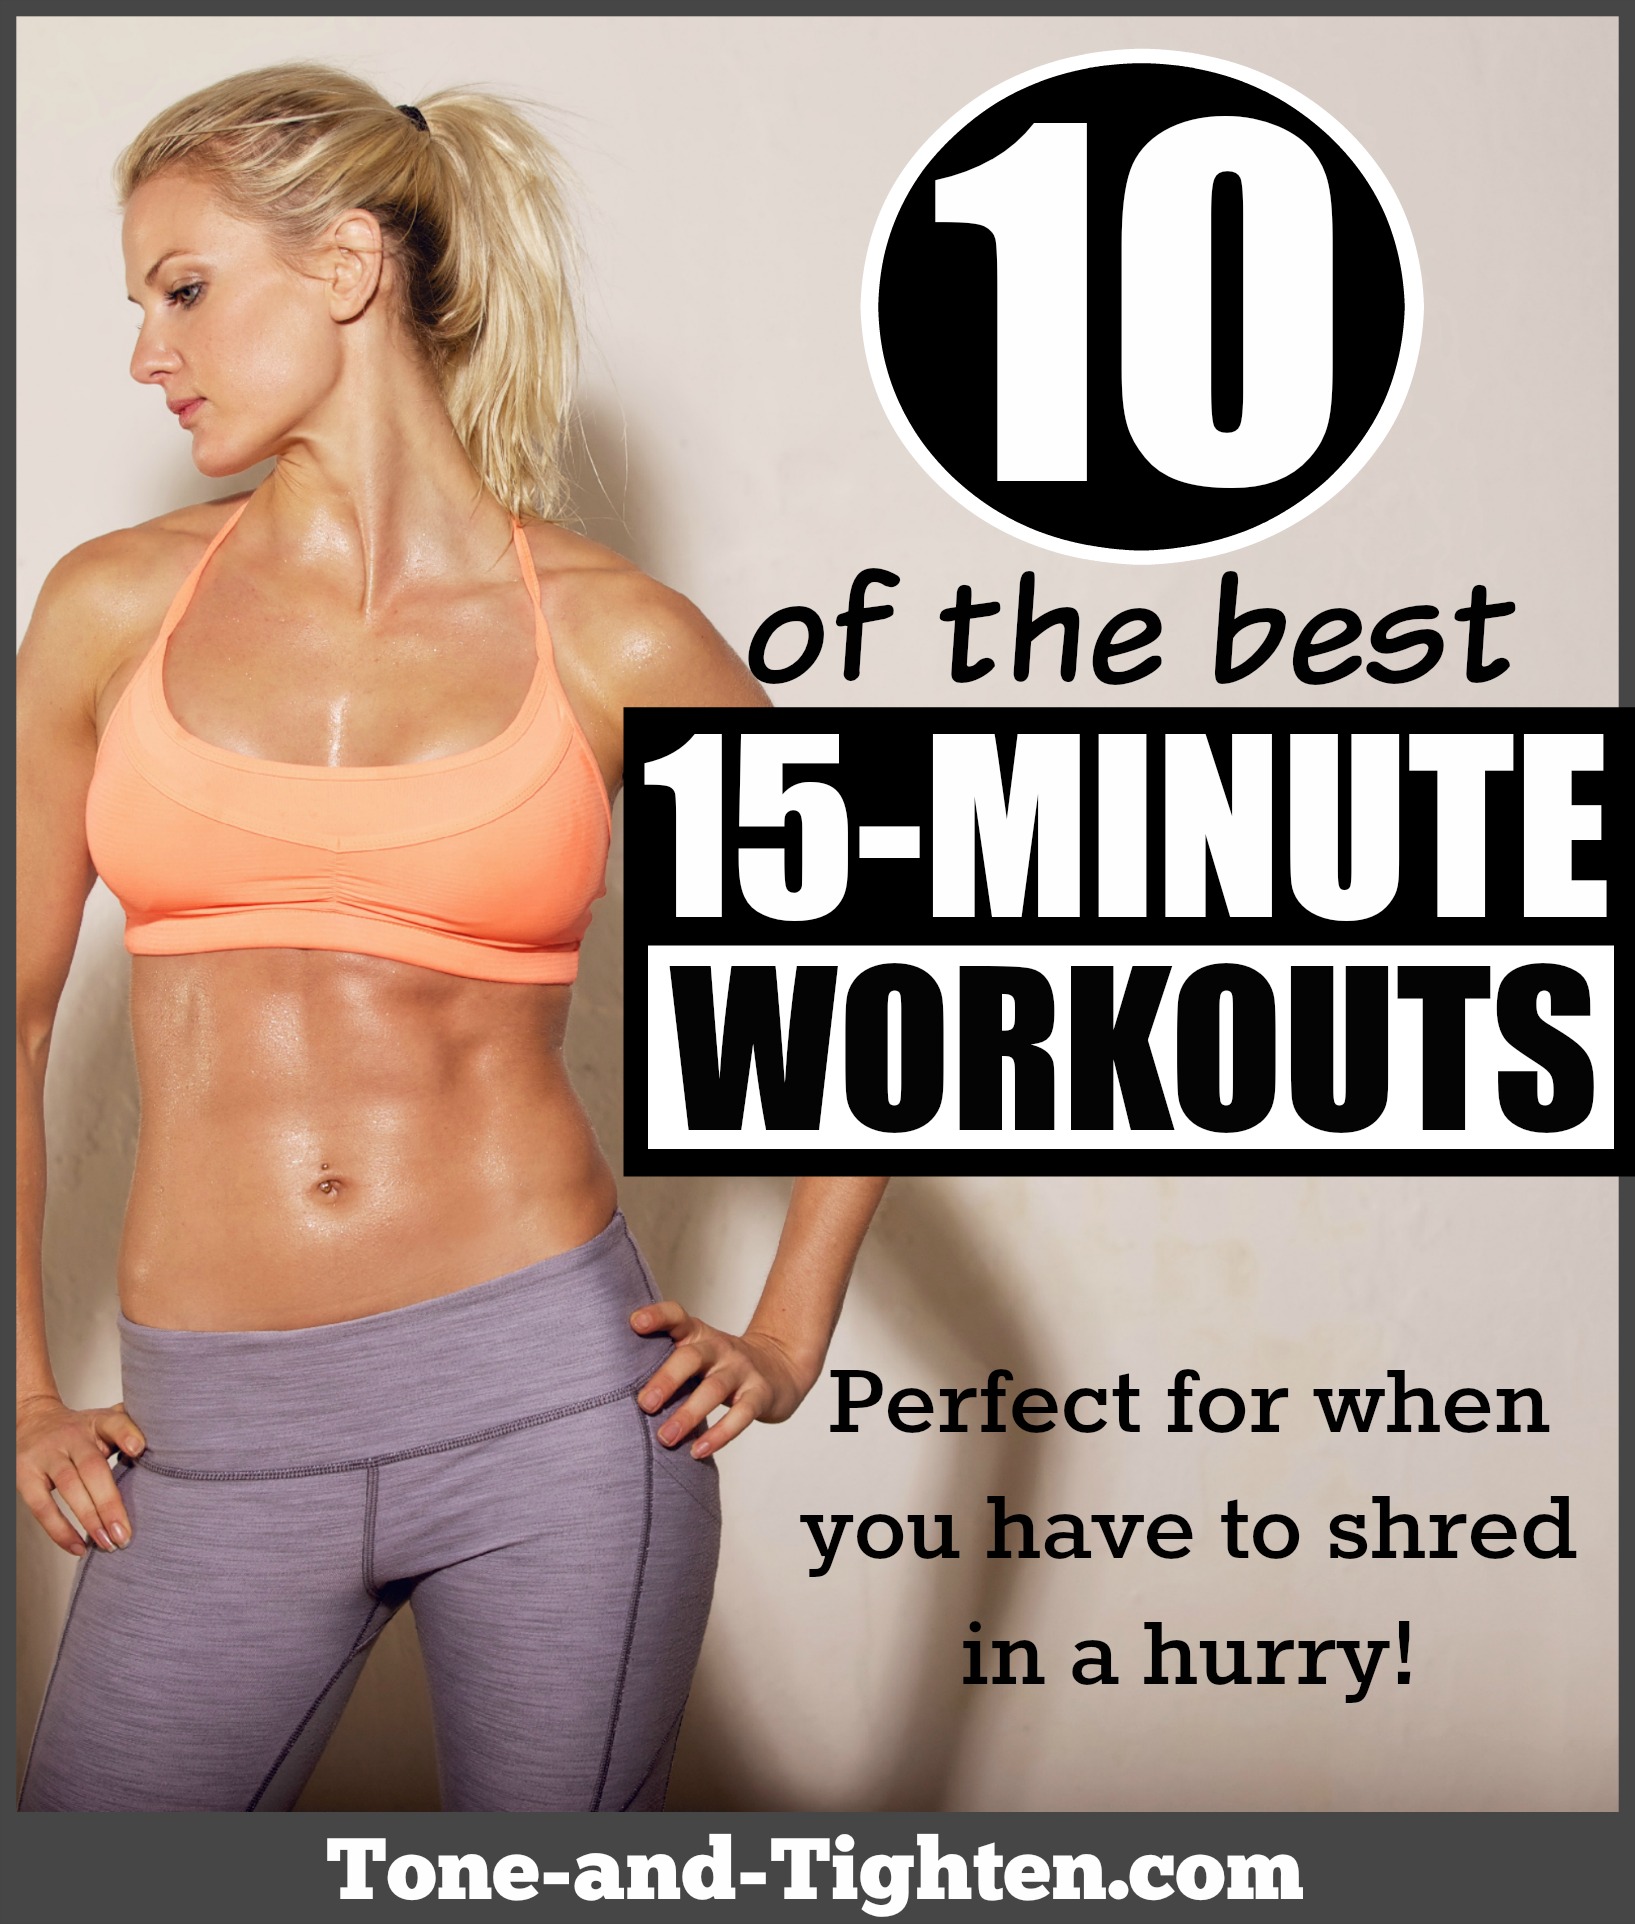 Ten quick, 15-minute workouts to tone and tighten